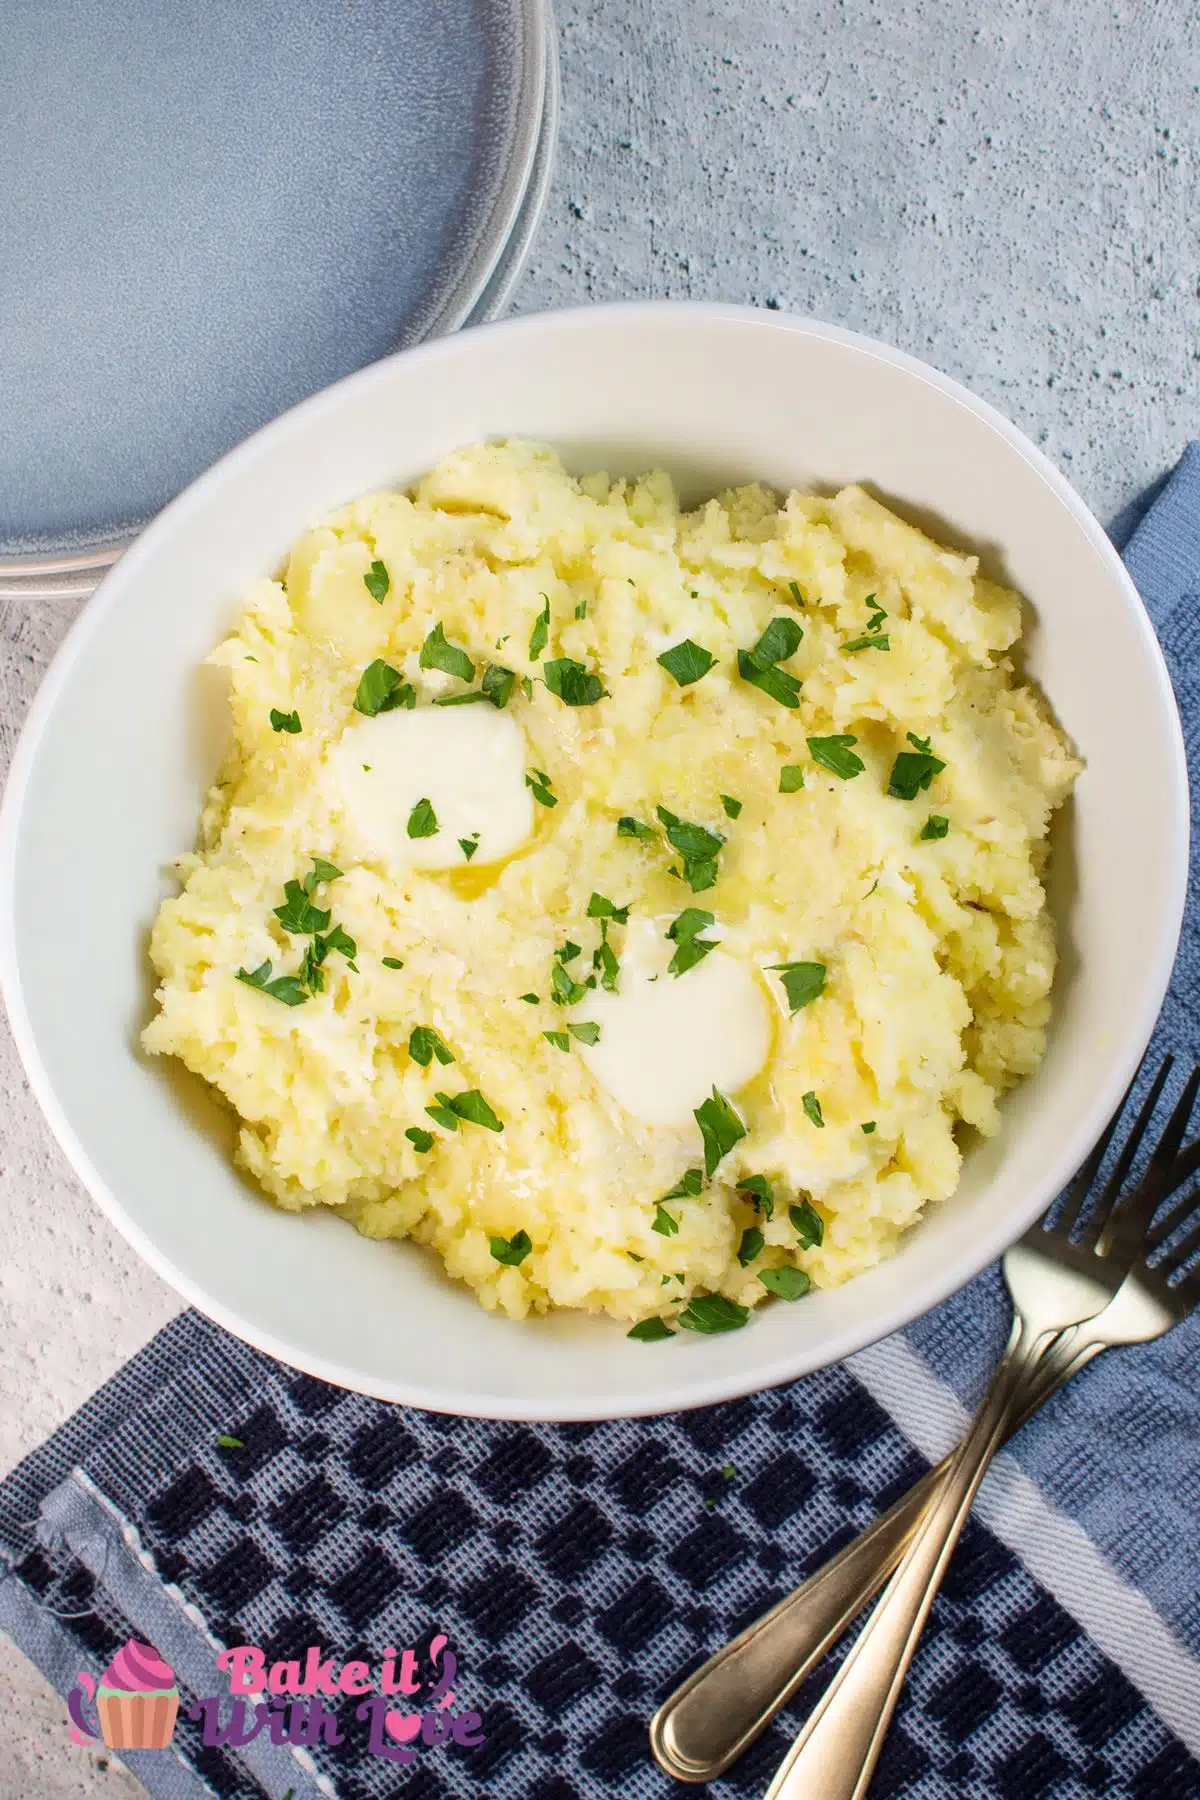 Tall image showing cream cheese mashed potatoes in a white bowl with butter and chives.